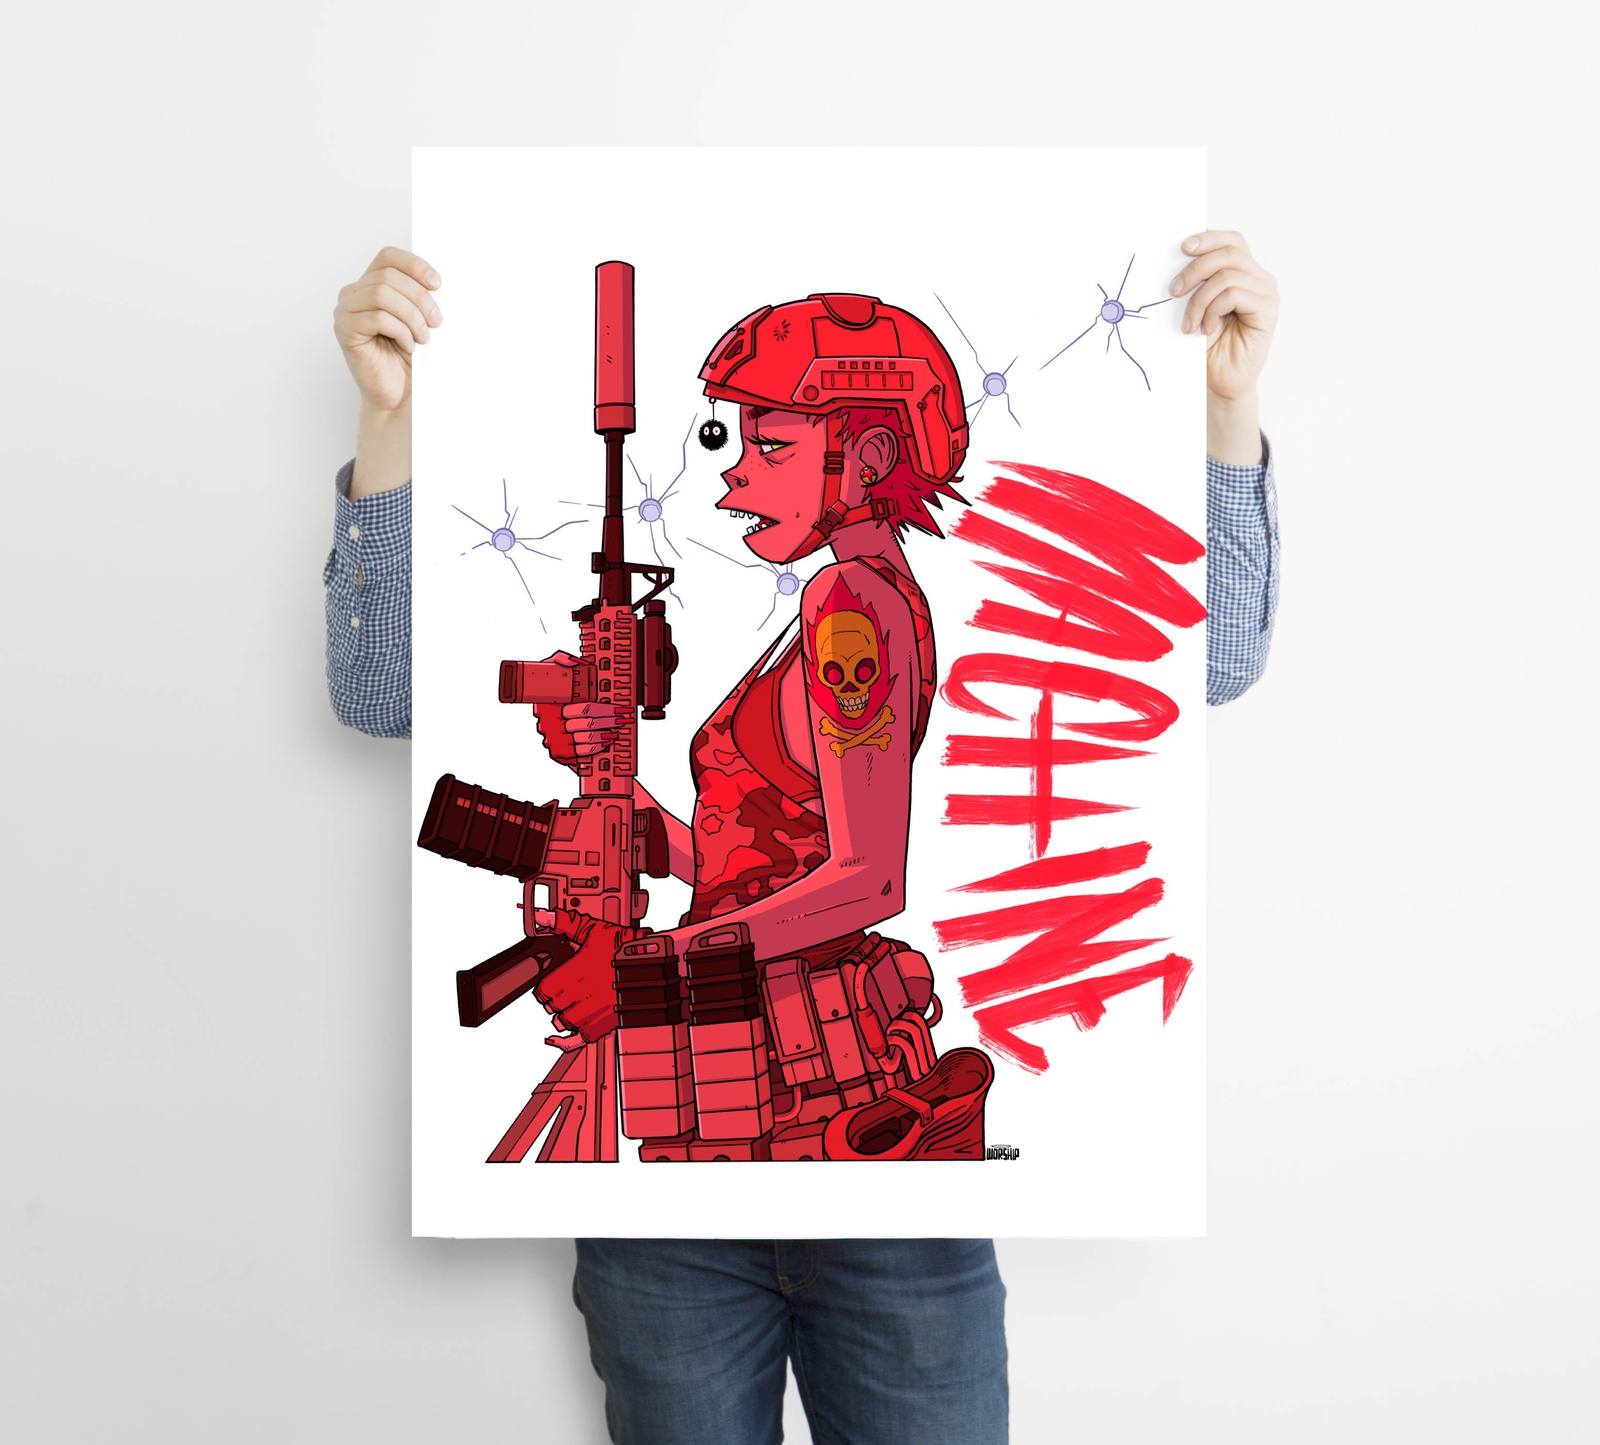 Unique and cool Gorillaz-style special forces poster/wall art illustration